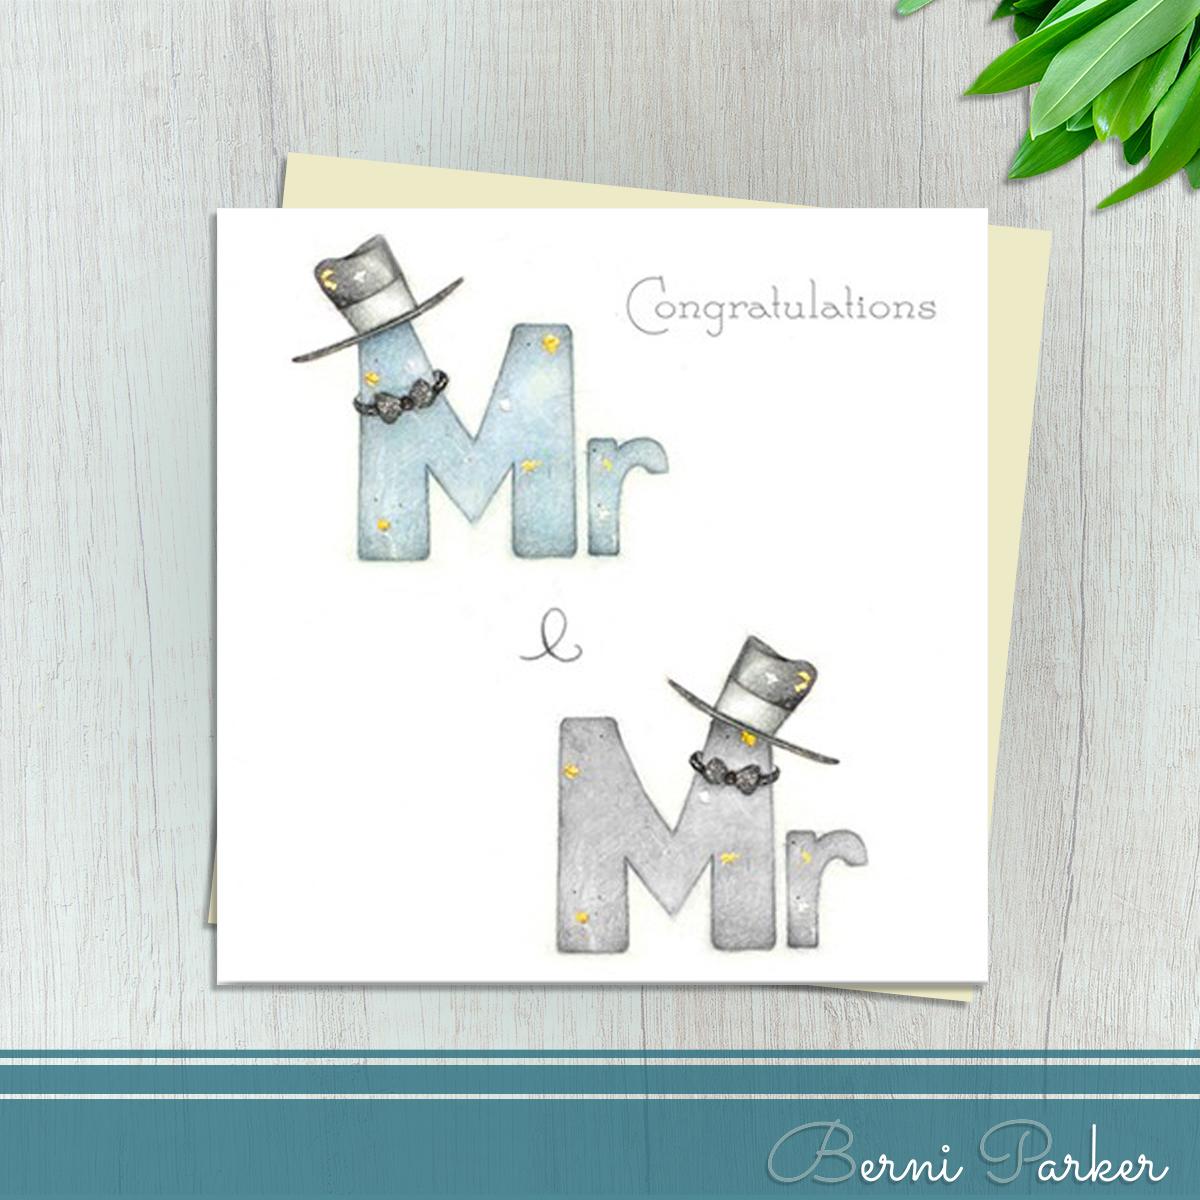 Congratulations Card For Mr And Mr. Shows The Words Mr And Mr Adorned With Top Hats And Bow Ties. Finished With Silver Foil Accents And Completed With An Ivory Envelope